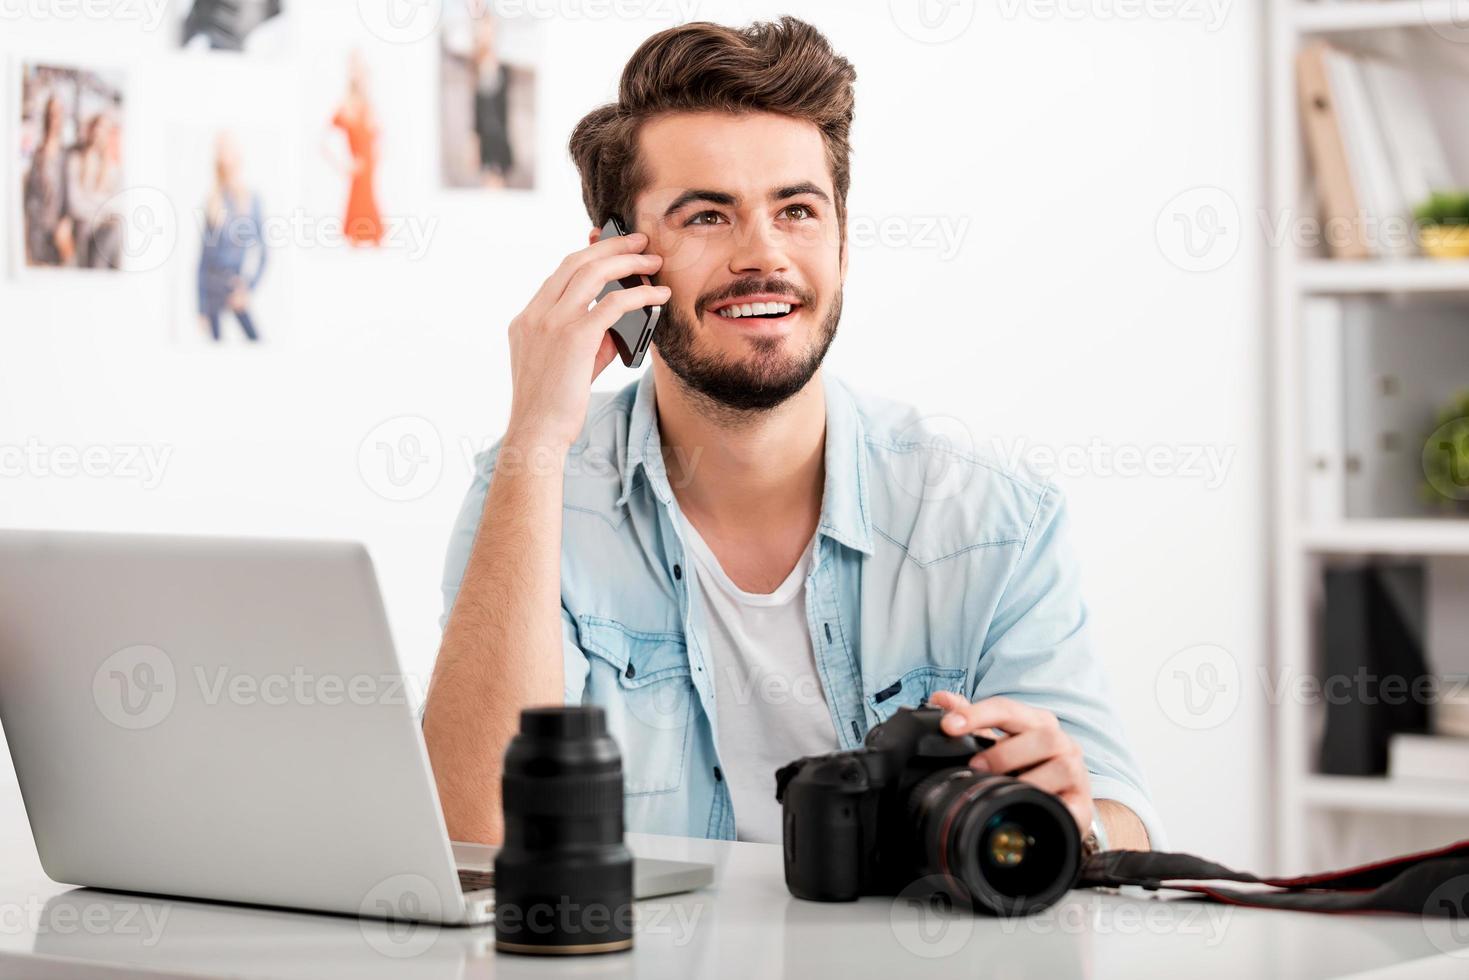 Enjoying creative work. Happy young man talking on the mobile phone and smiling while sitting at his working place and holding digital camera photo